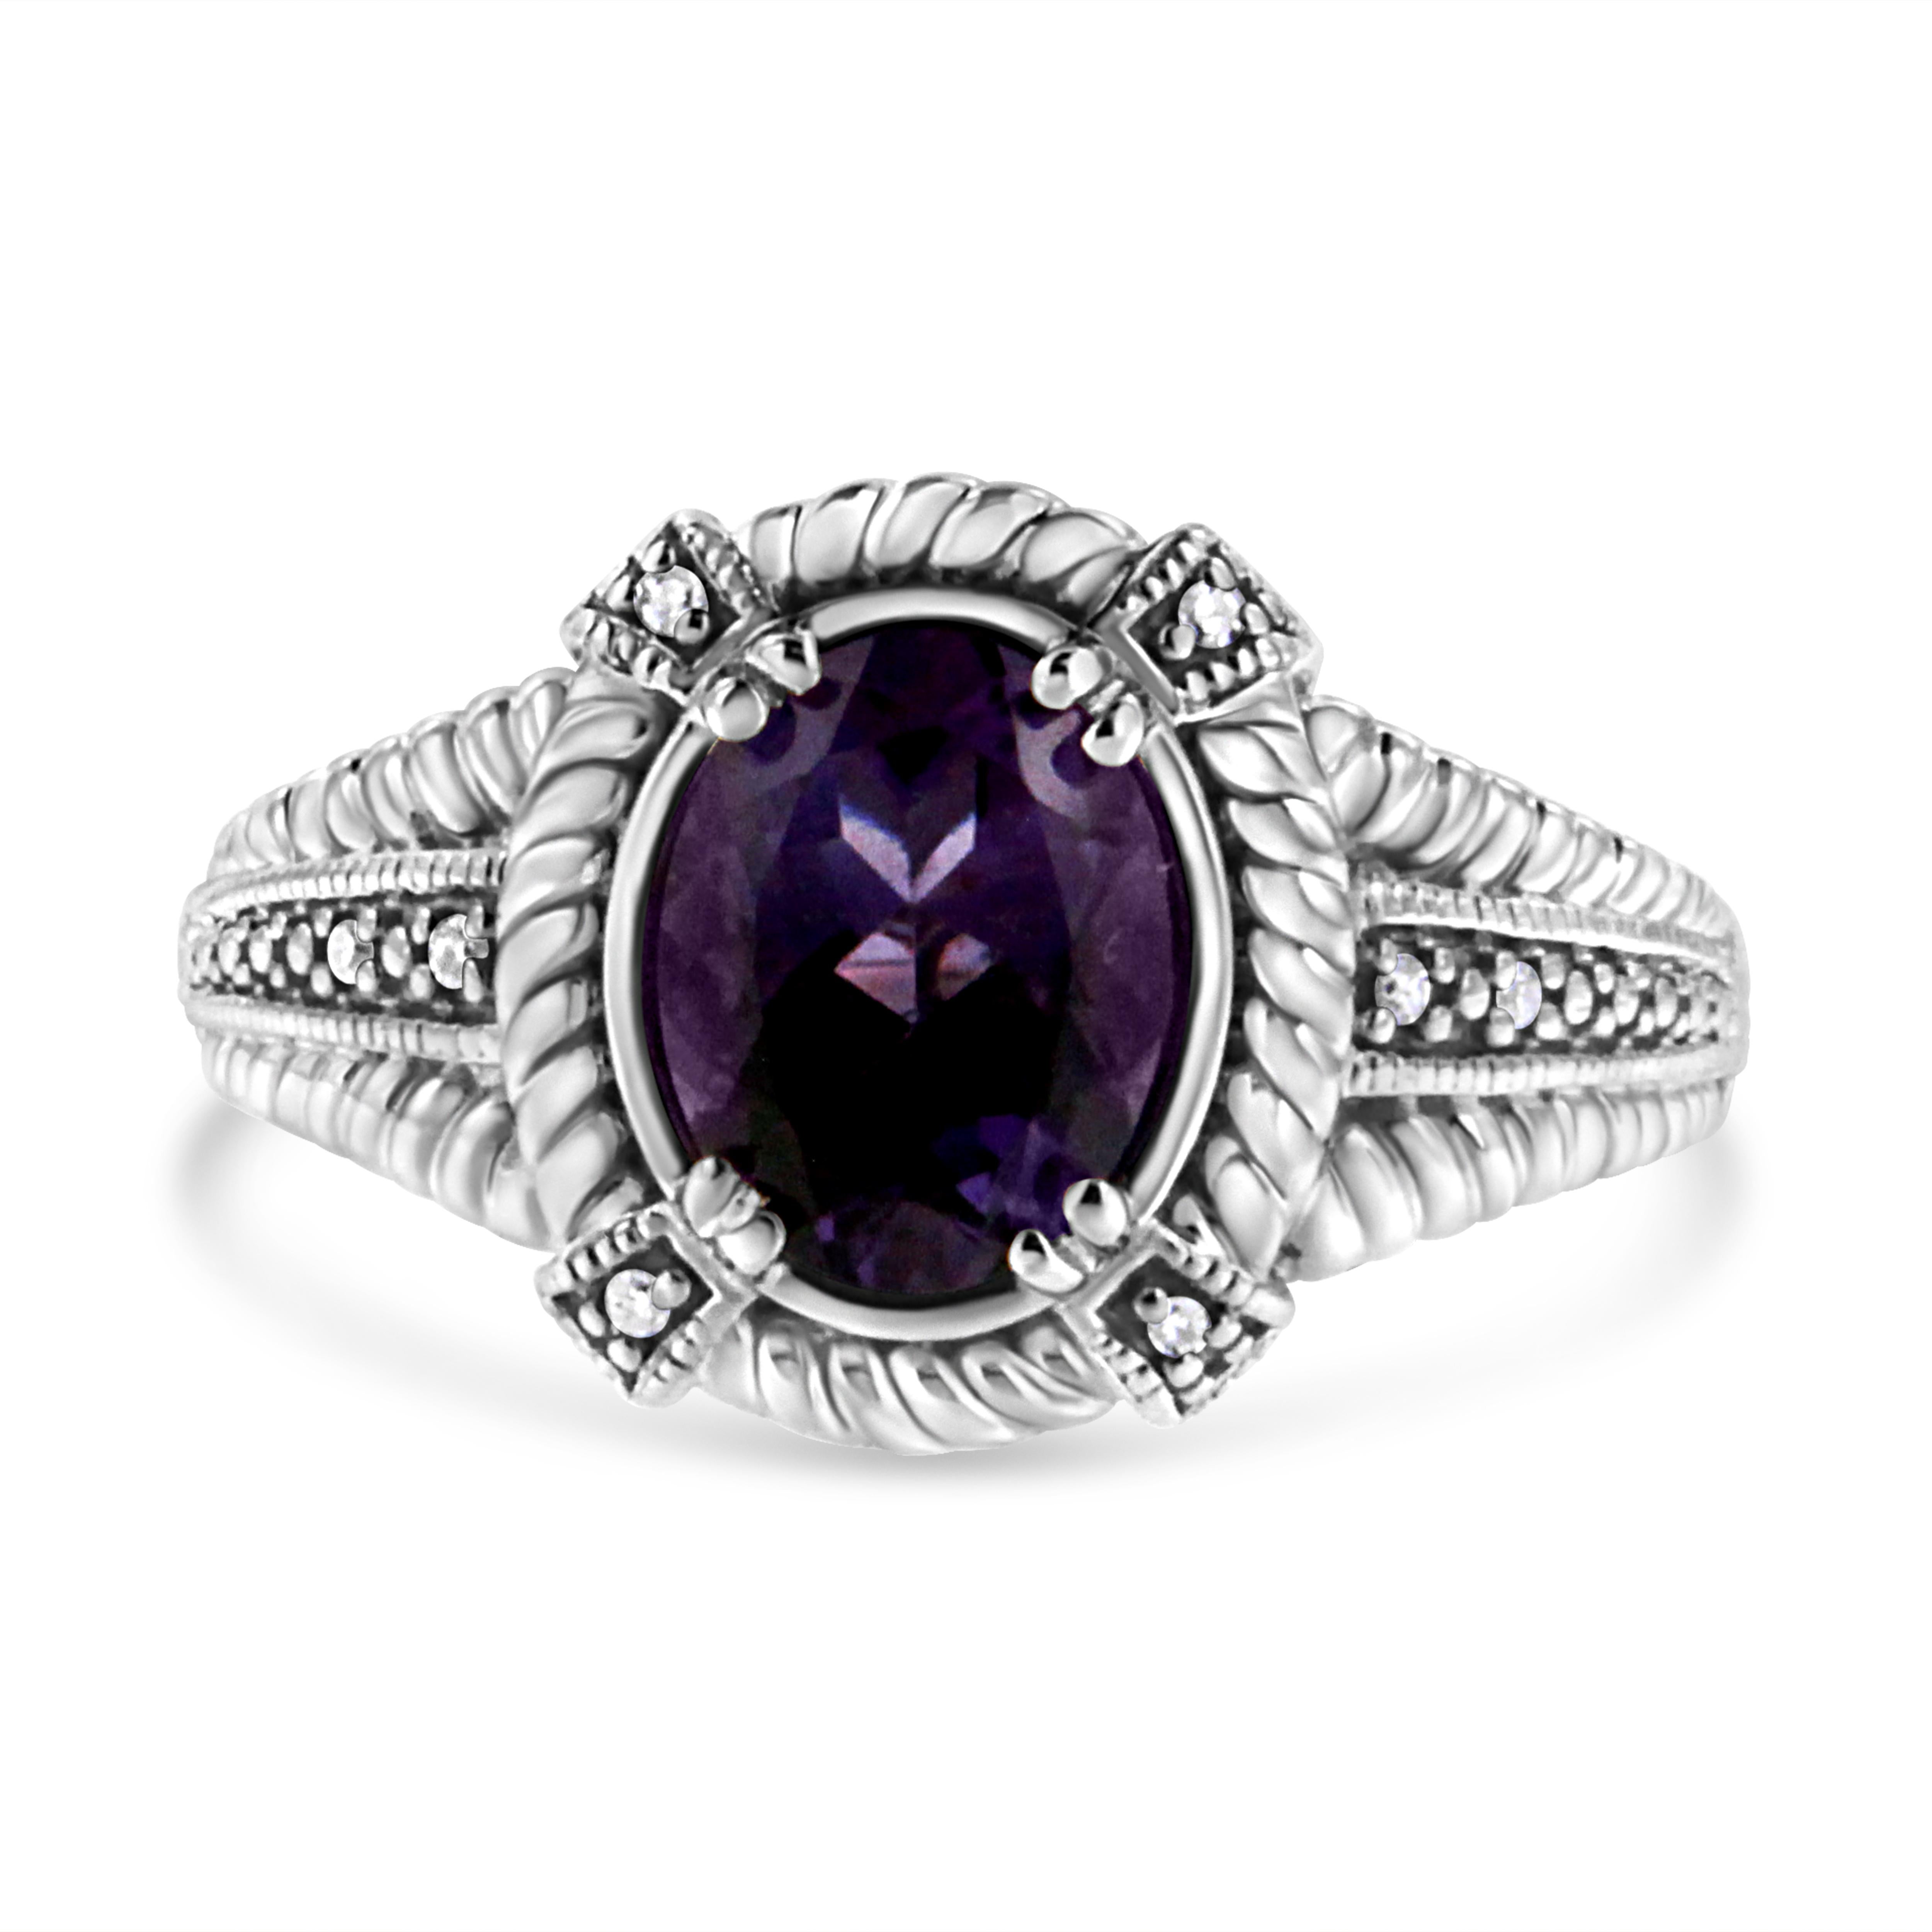 This exquisite amethyst and diamond ring will stun your beloved. Fashioned in radiant sterling silver this dazzling ring showcases a large centrally staged Oval cut Amethyst embellished with 8 pave set single cut diamonds engrossed by a bright